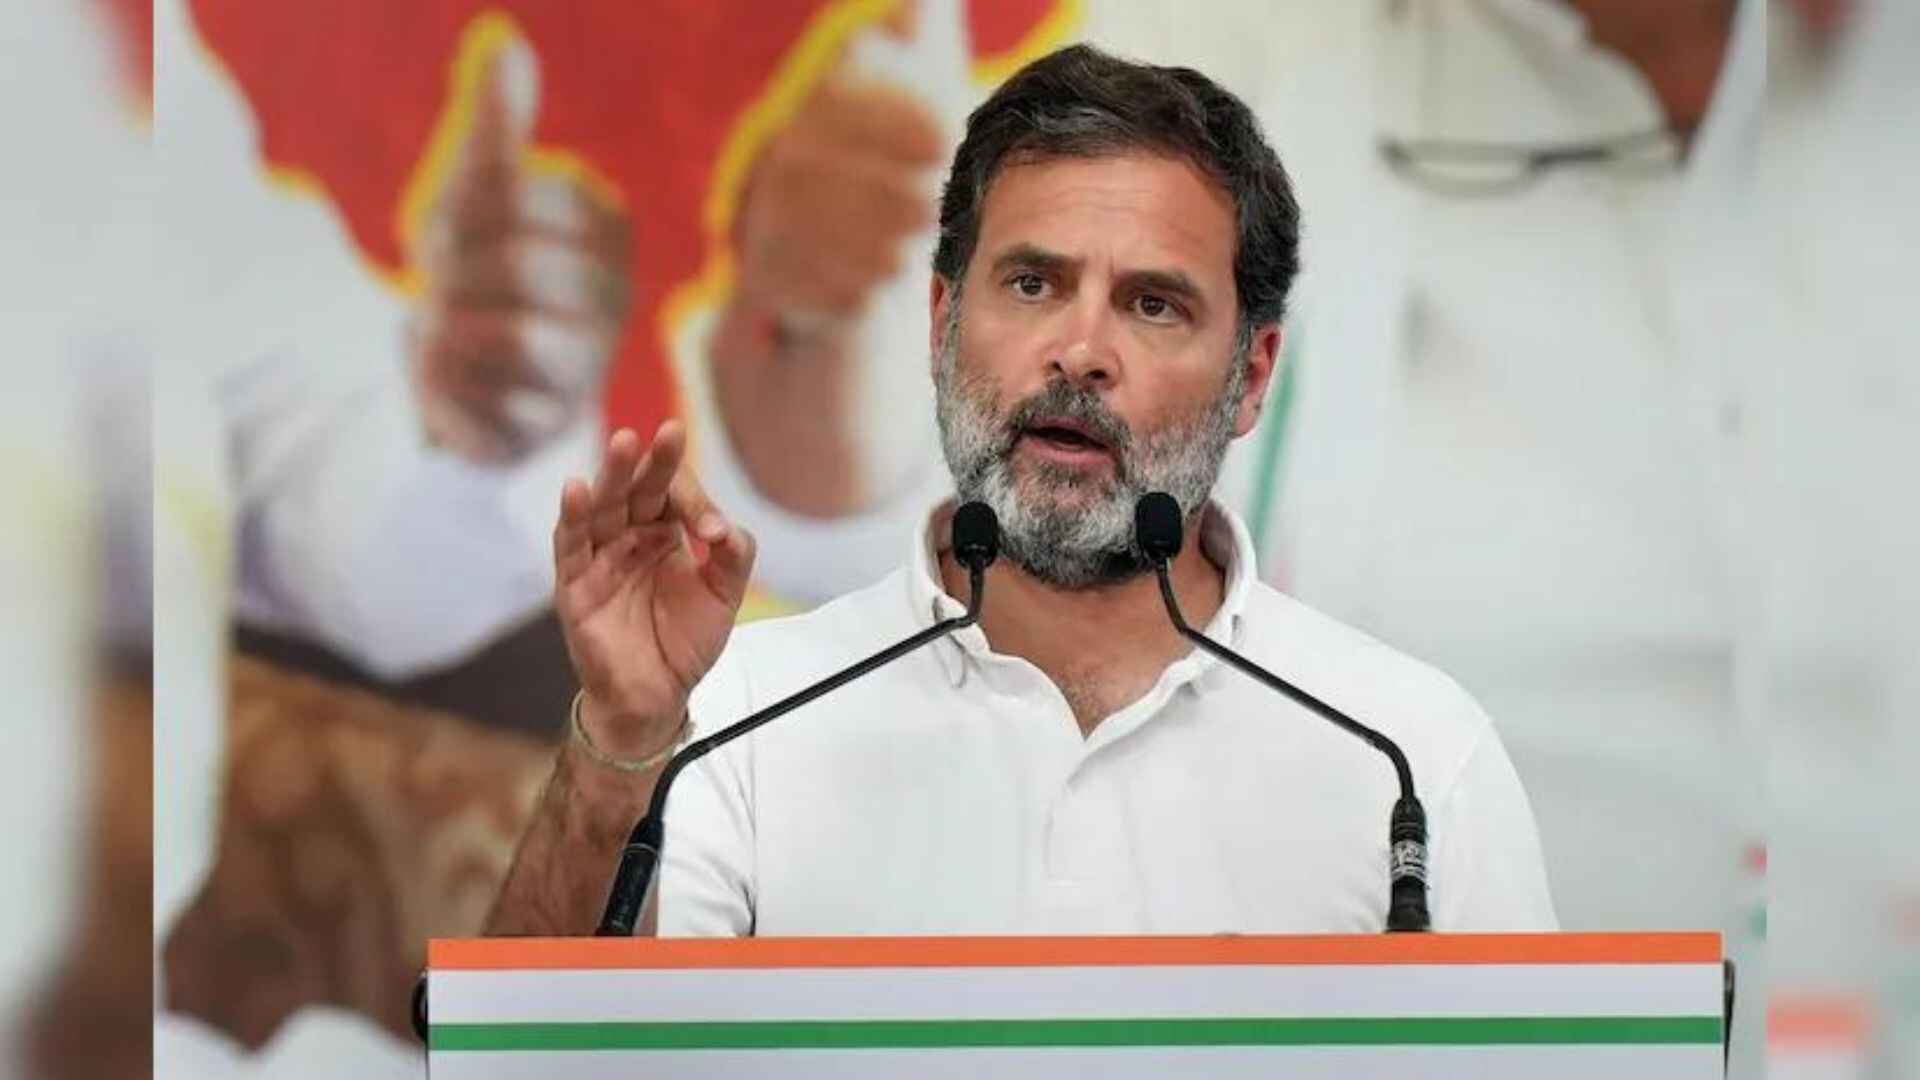 Rahul Gandhi Calls for Voter Turnout, Emphasizing the Power of Each Ballot